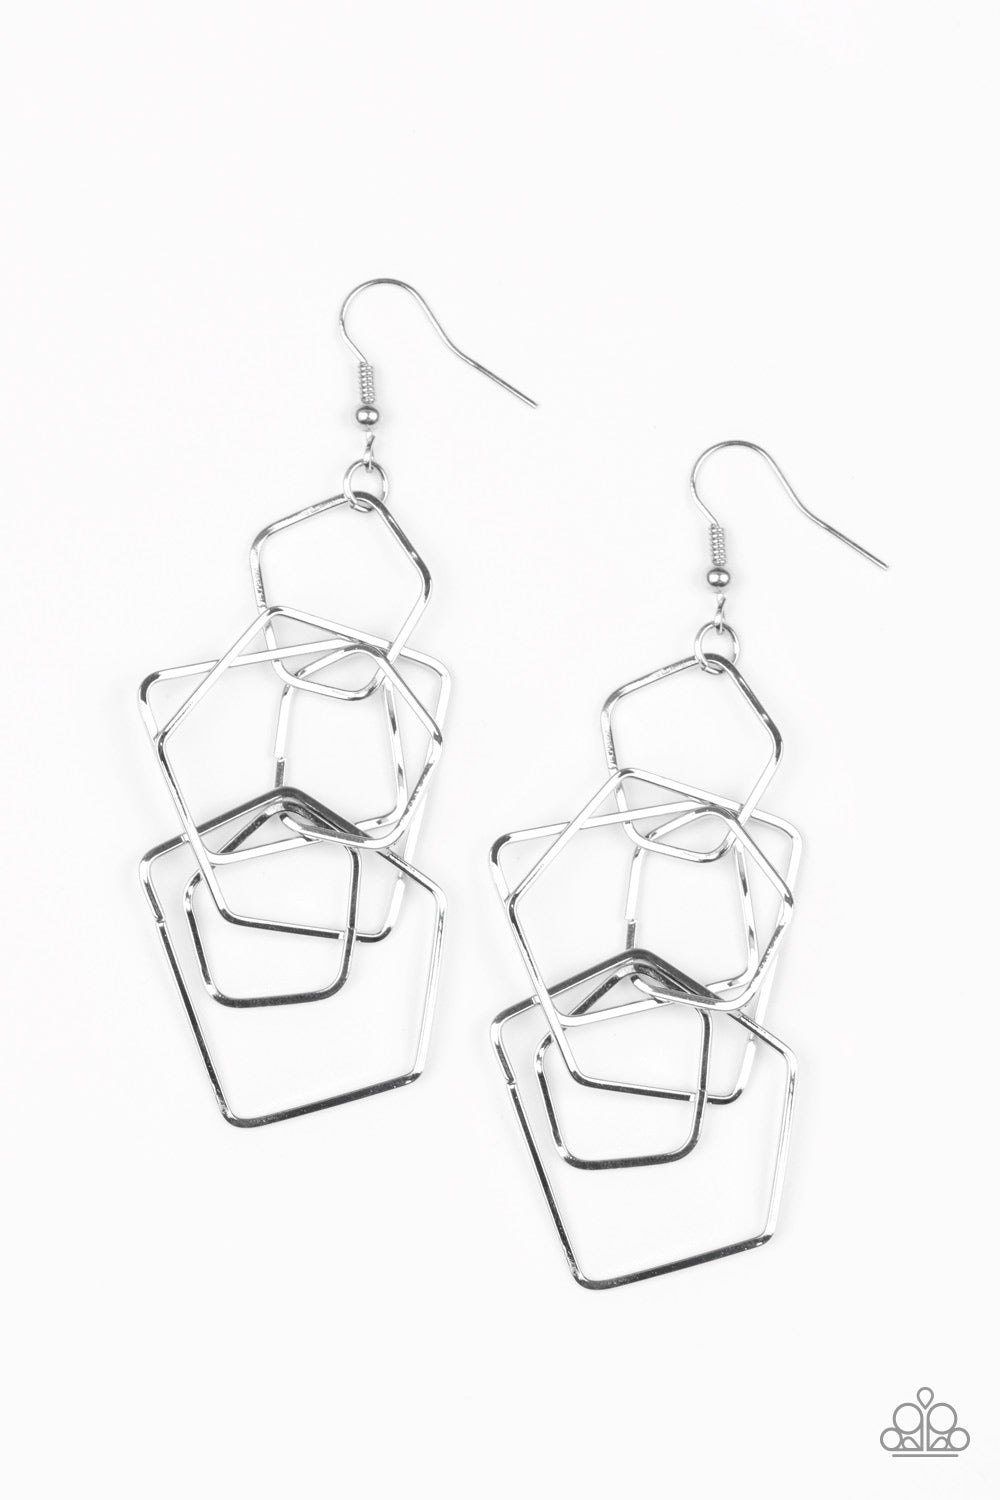 Glistening silver bars bend into airy pentagon shaped frames as they trickle from the ear, creating an edgy clustered fringe. Earring attaches to a standard fishhook fitting.